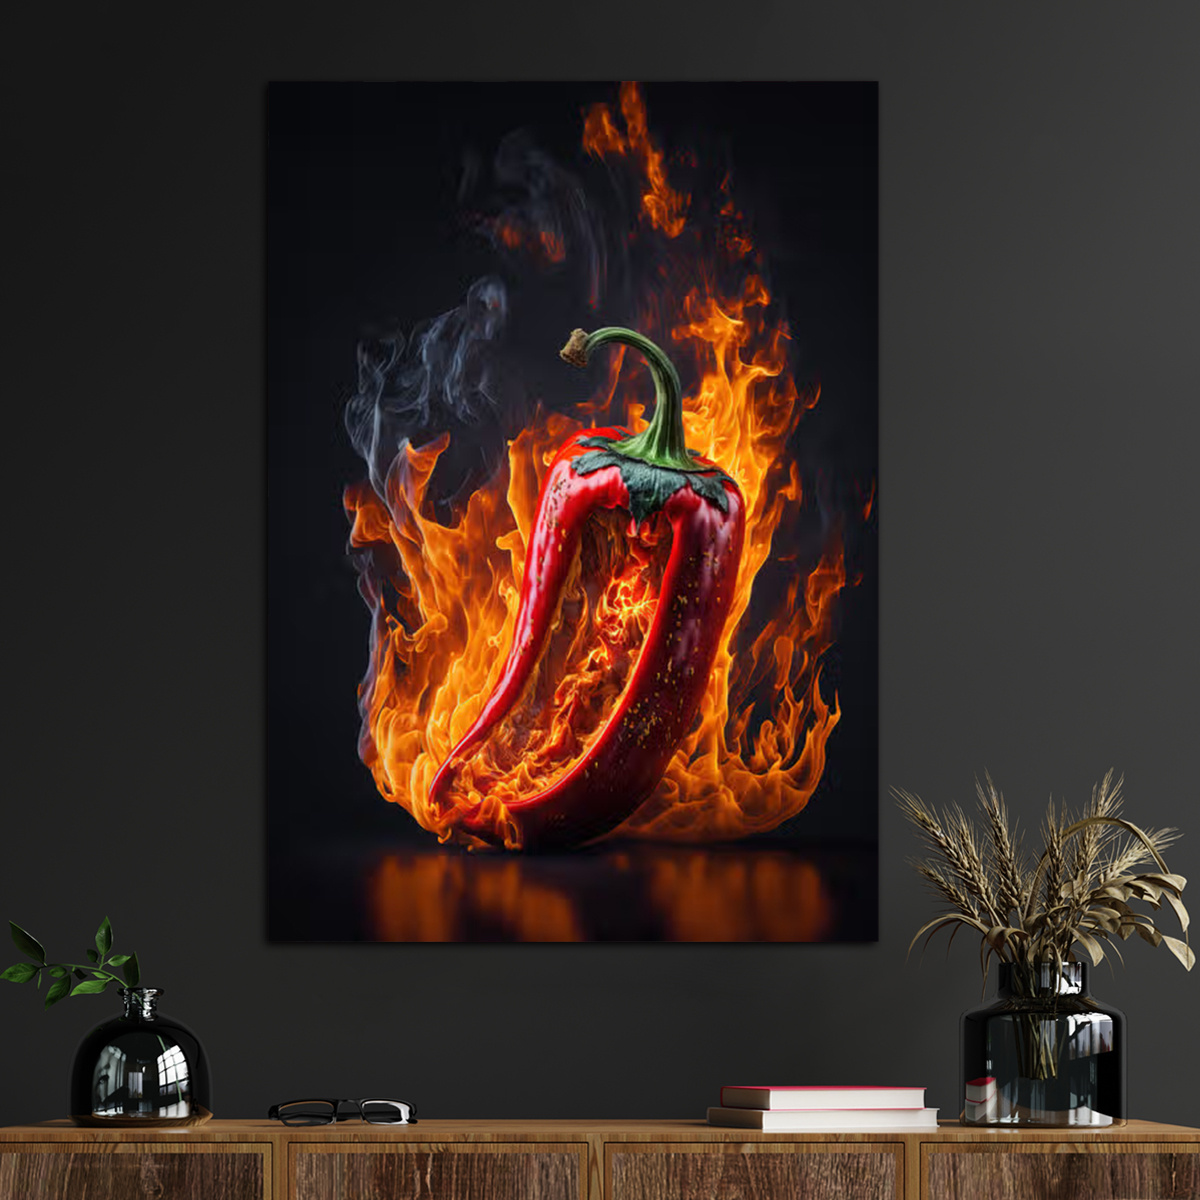 

1pc Red Chili Pepper Canvas Wall Art For Home Decor, Food Lovers Poster Wall Decor High Quality Canvas Prints For Living Room Bedroom Kitchen Office Cafe Decor, Perfect Gift And Decoration